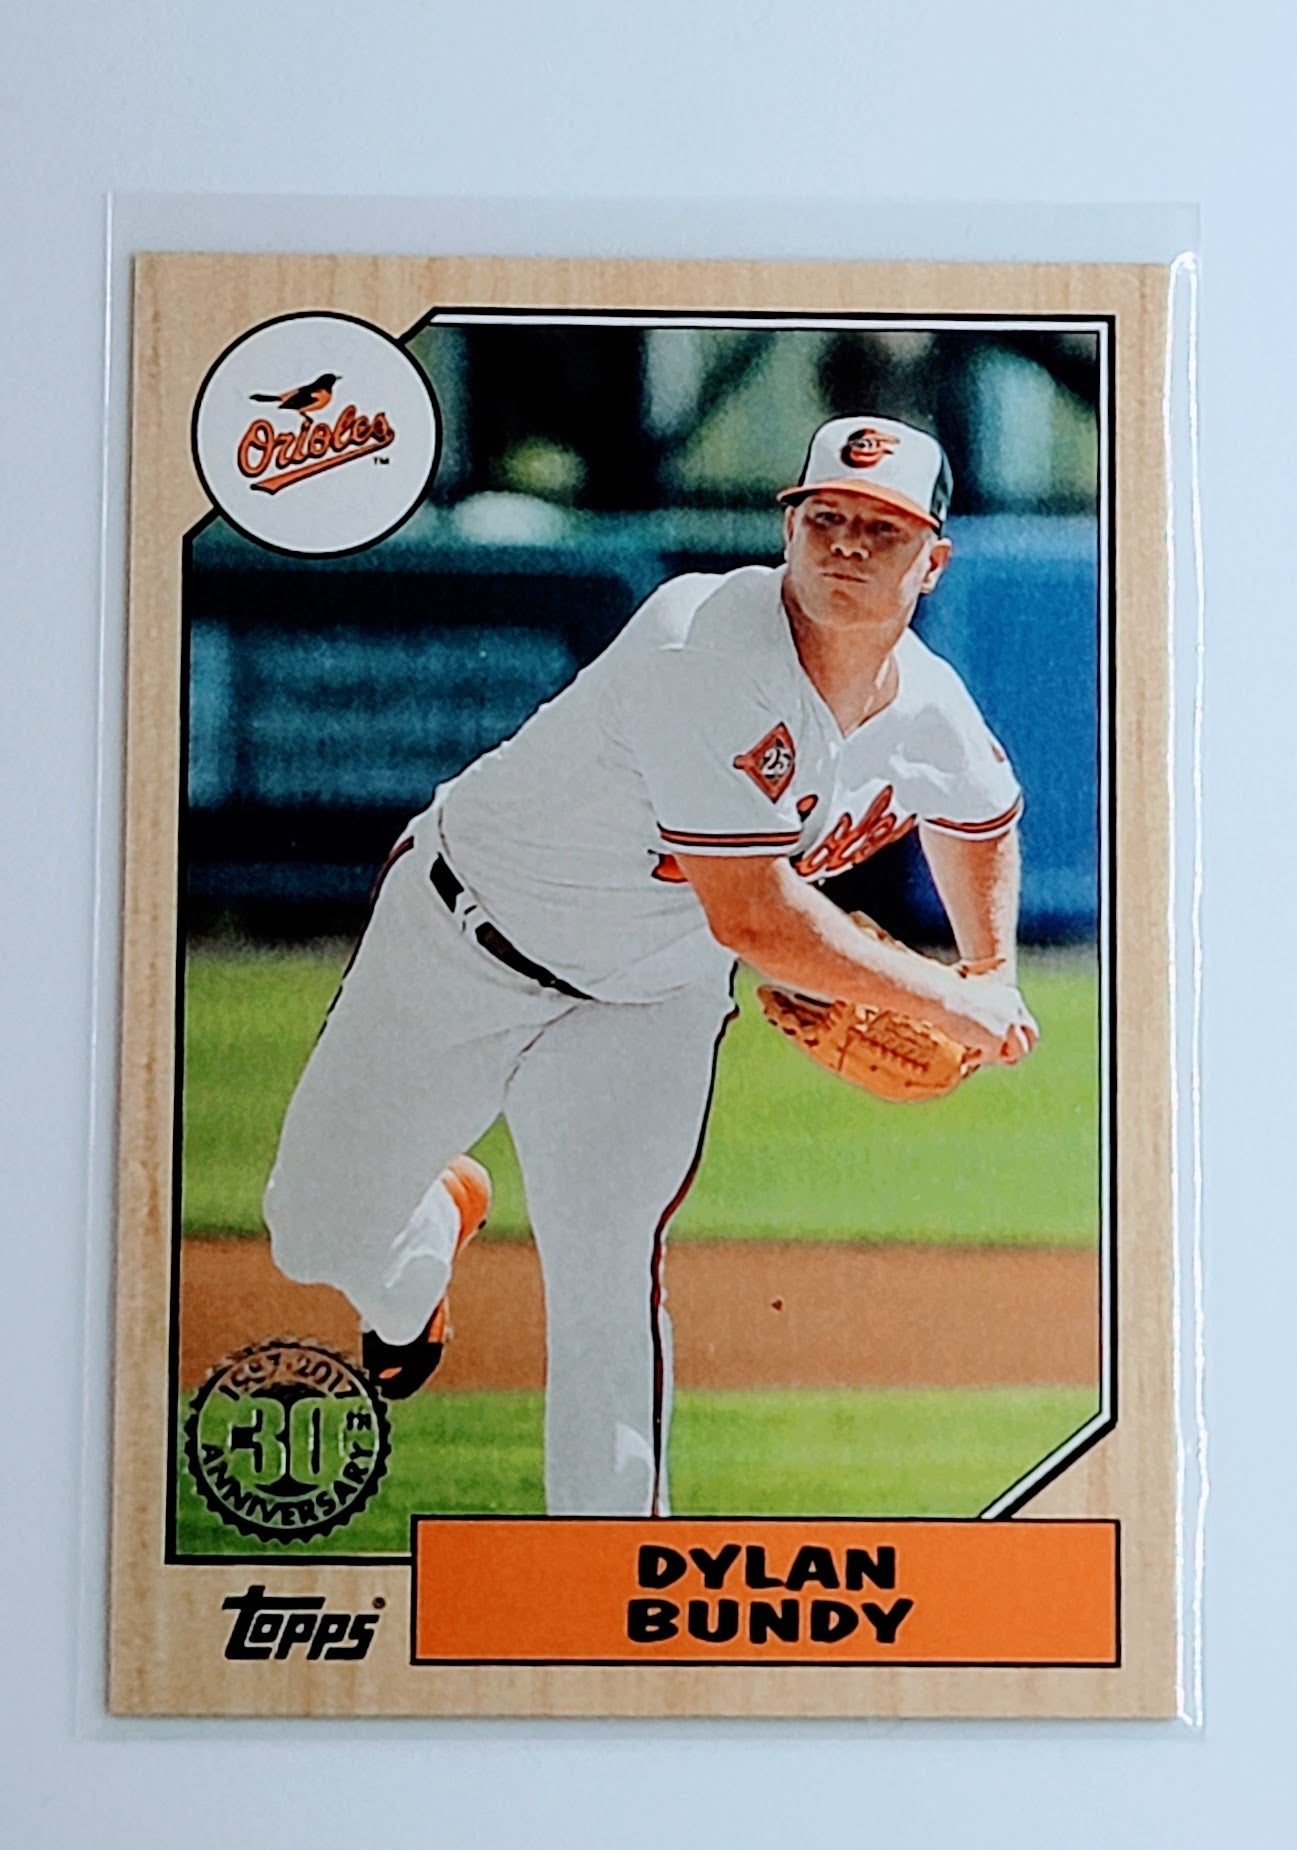 2017 Topps Update Dylan Bundy
  1987 Topps Baseball  Baseball Card  TH13C simple Xclusive Collectibles   